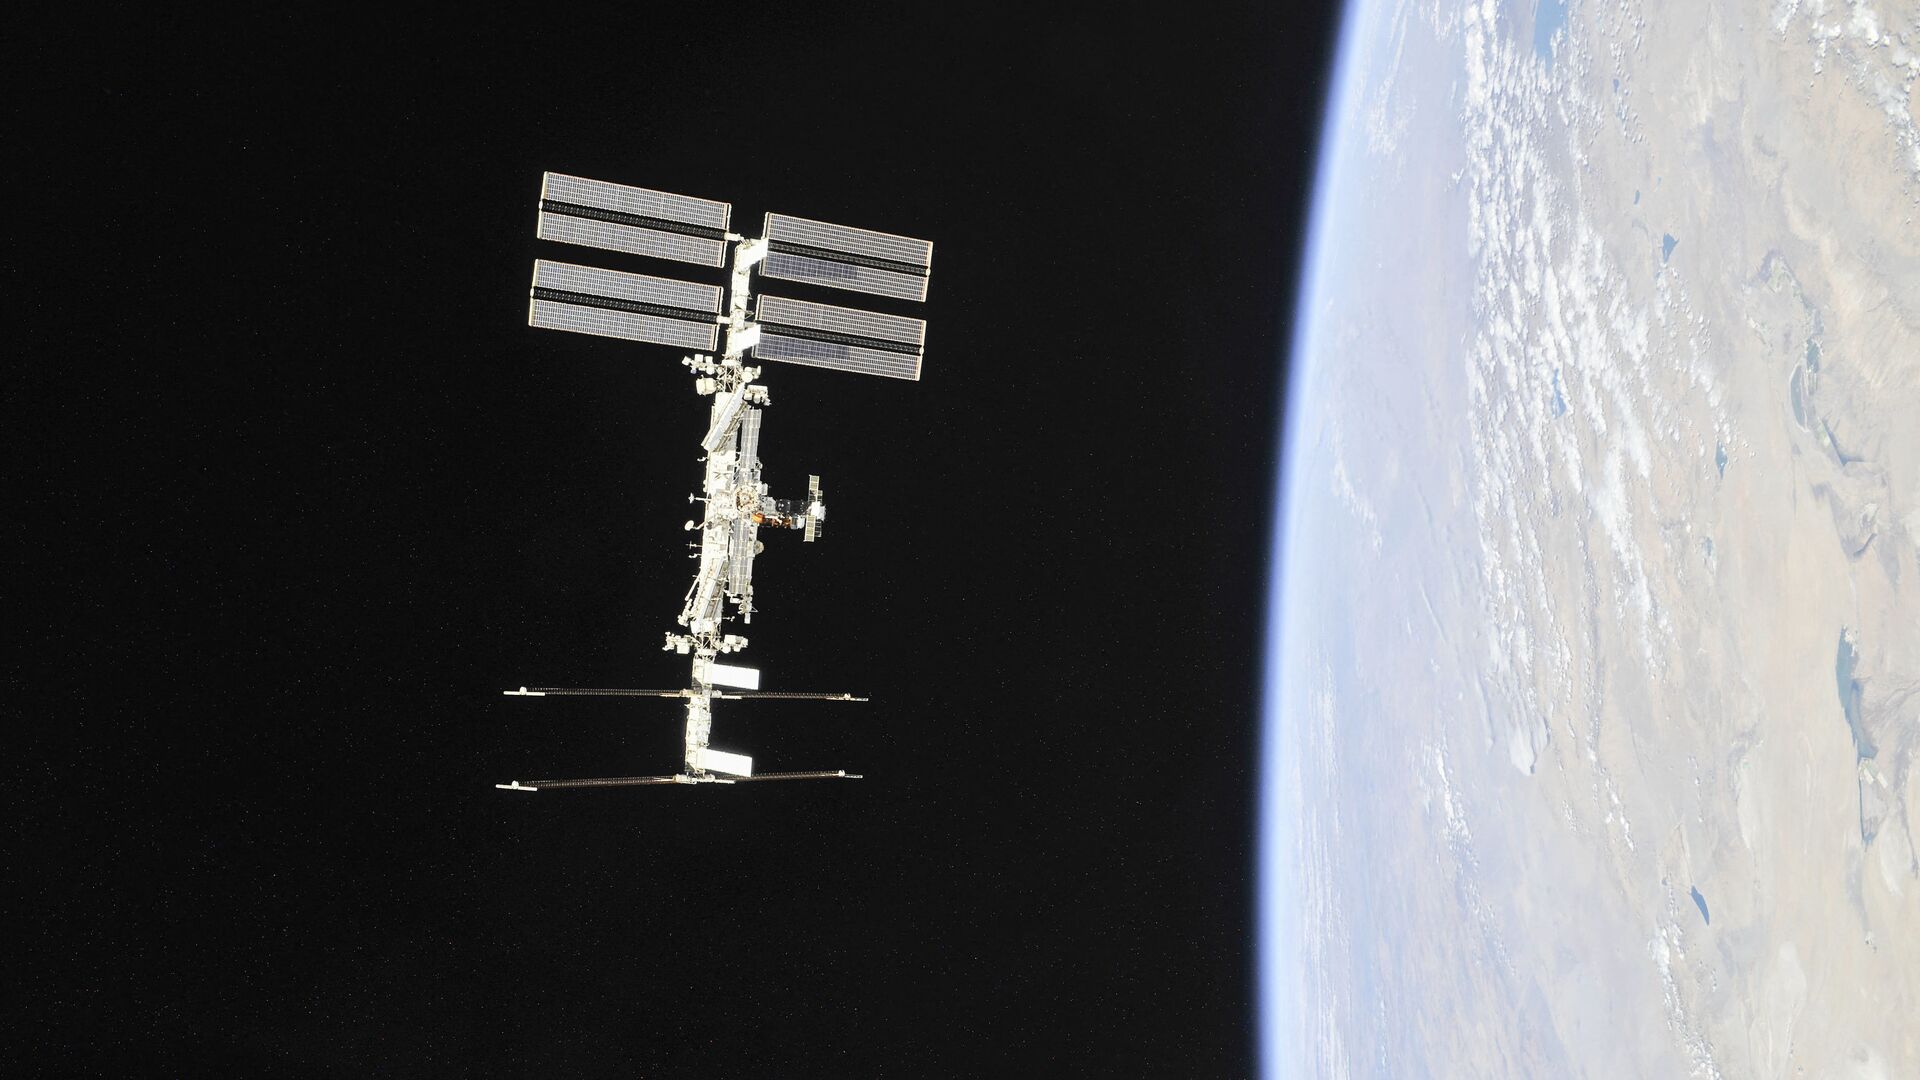 This file NASA handout photo obtained November 4, 2018 shows the International Space Station photographed by Expedition 56 crew members from a Soyuz spacecraft after undocking.  - Sputnik International, 1920, 02.06.2021